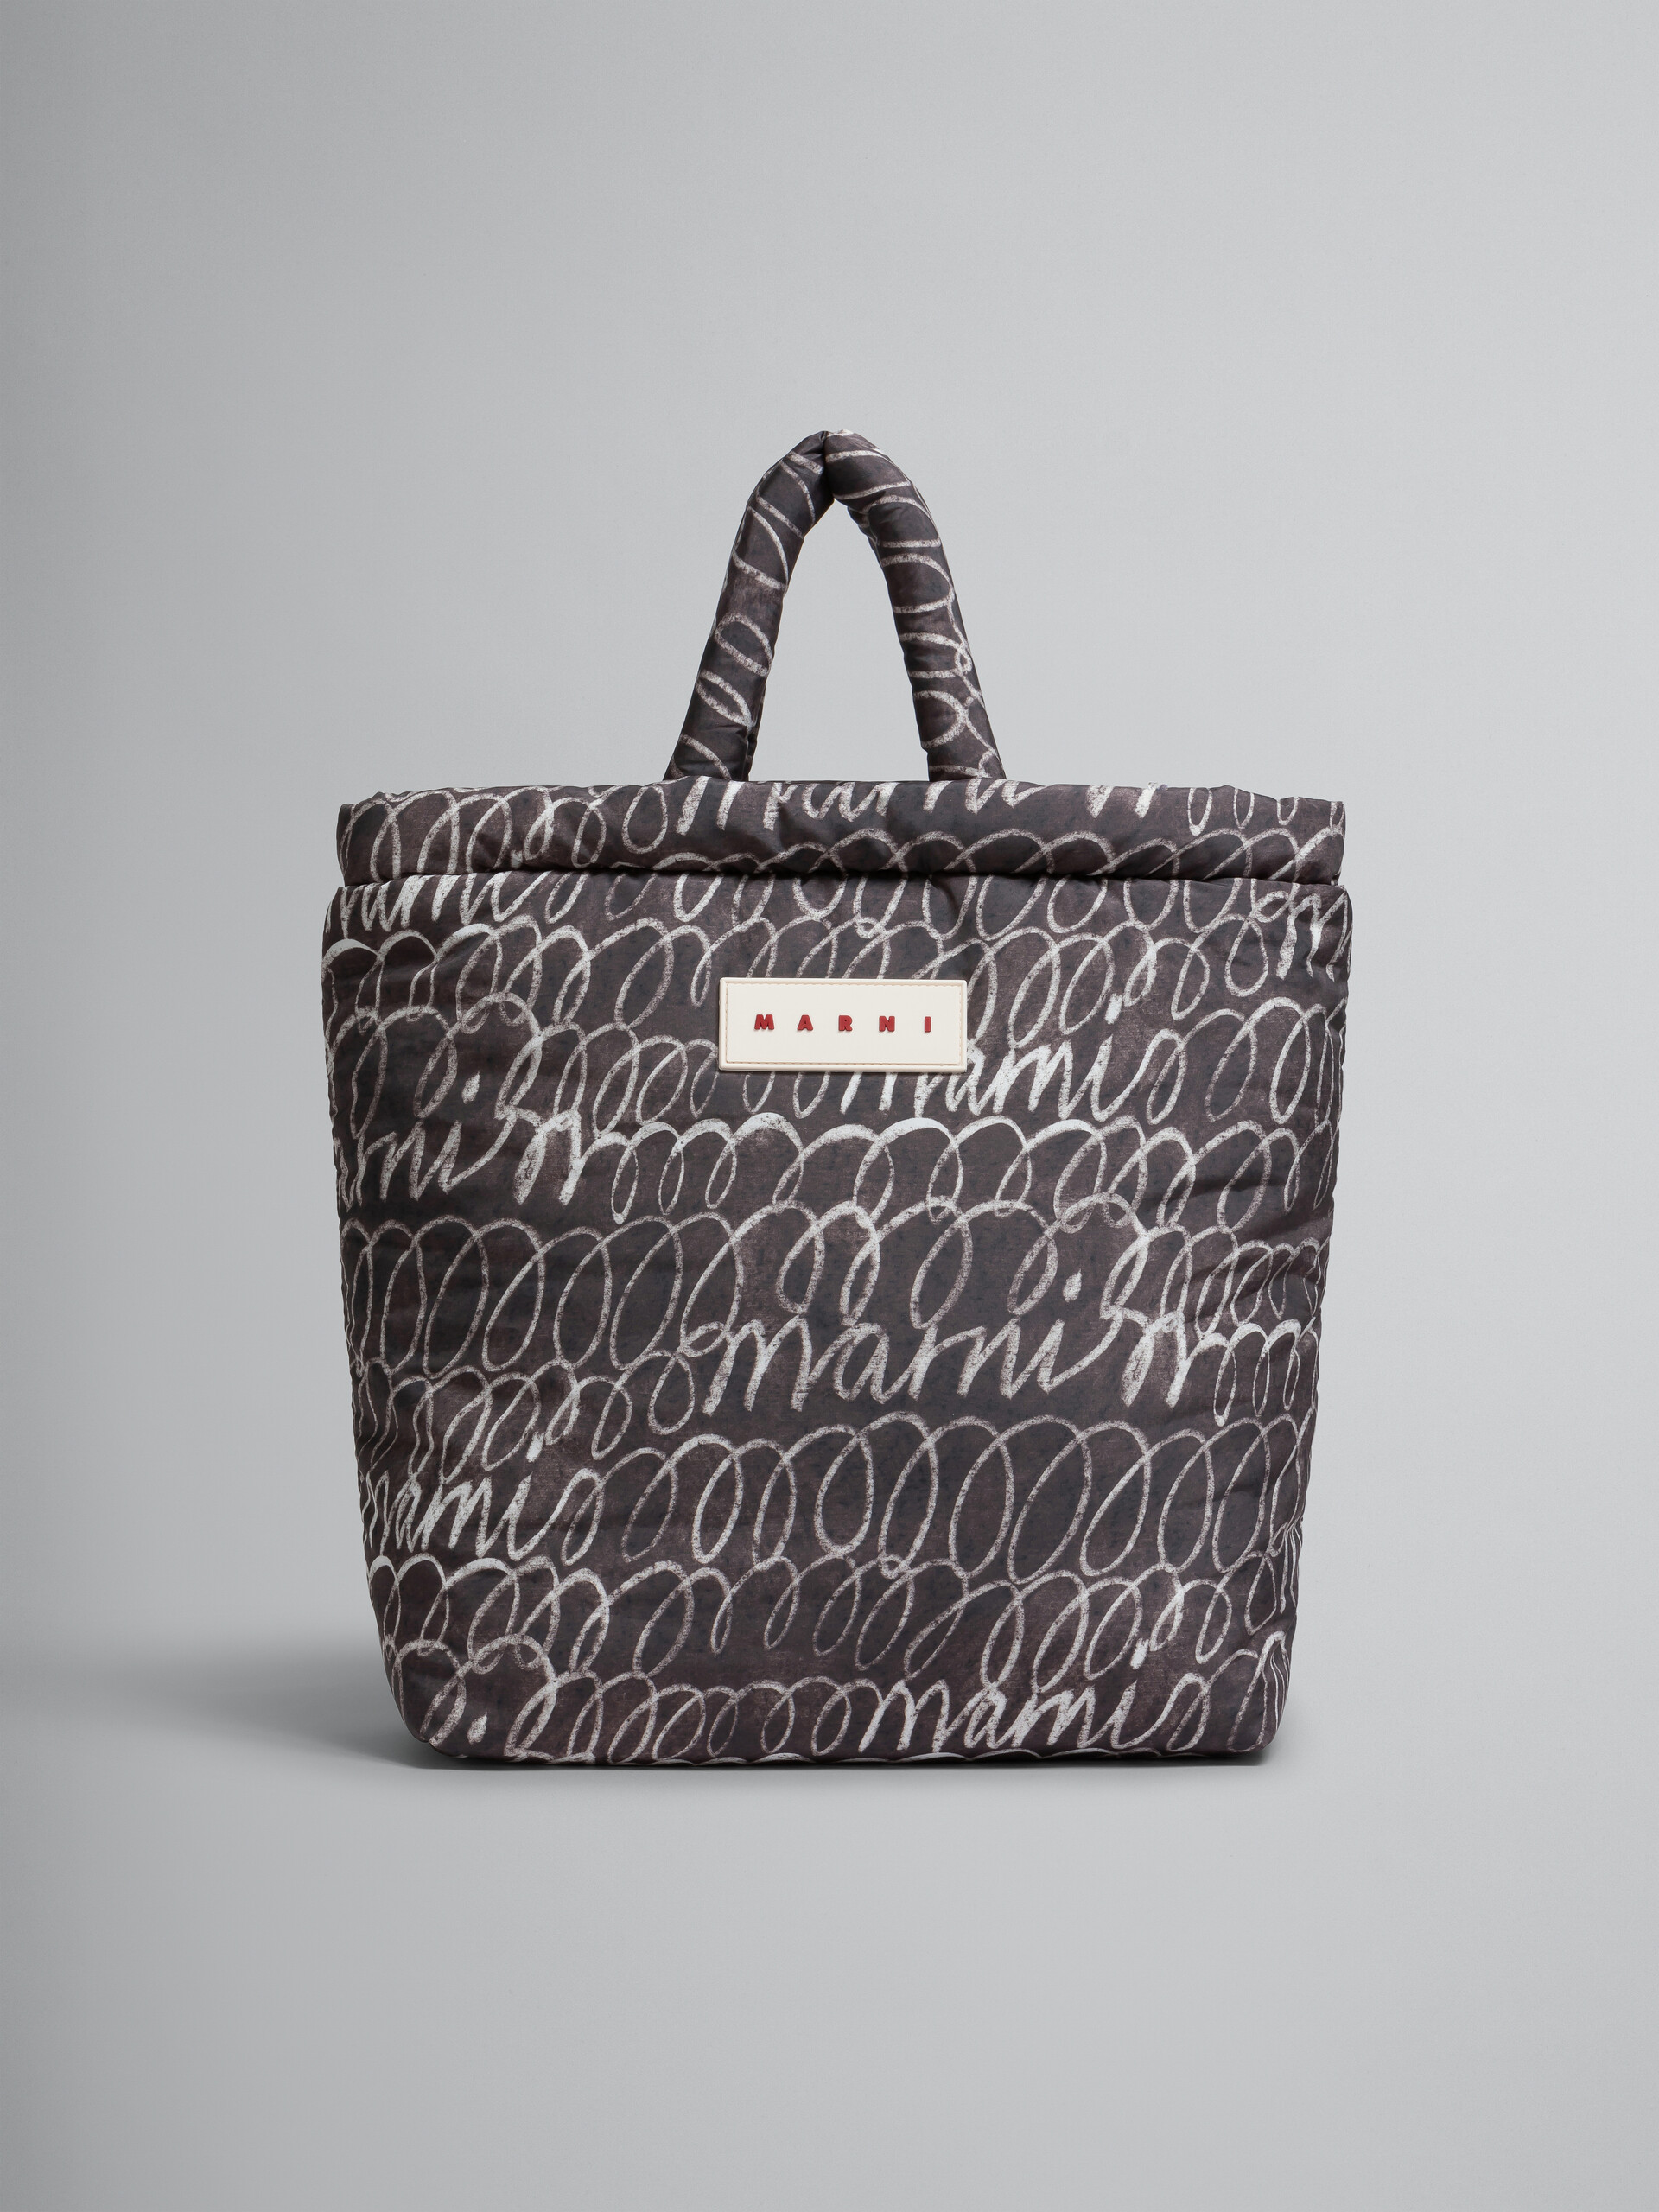 Black Puff tote bag with Marni Scribble print - Shopping Bags - Image 1